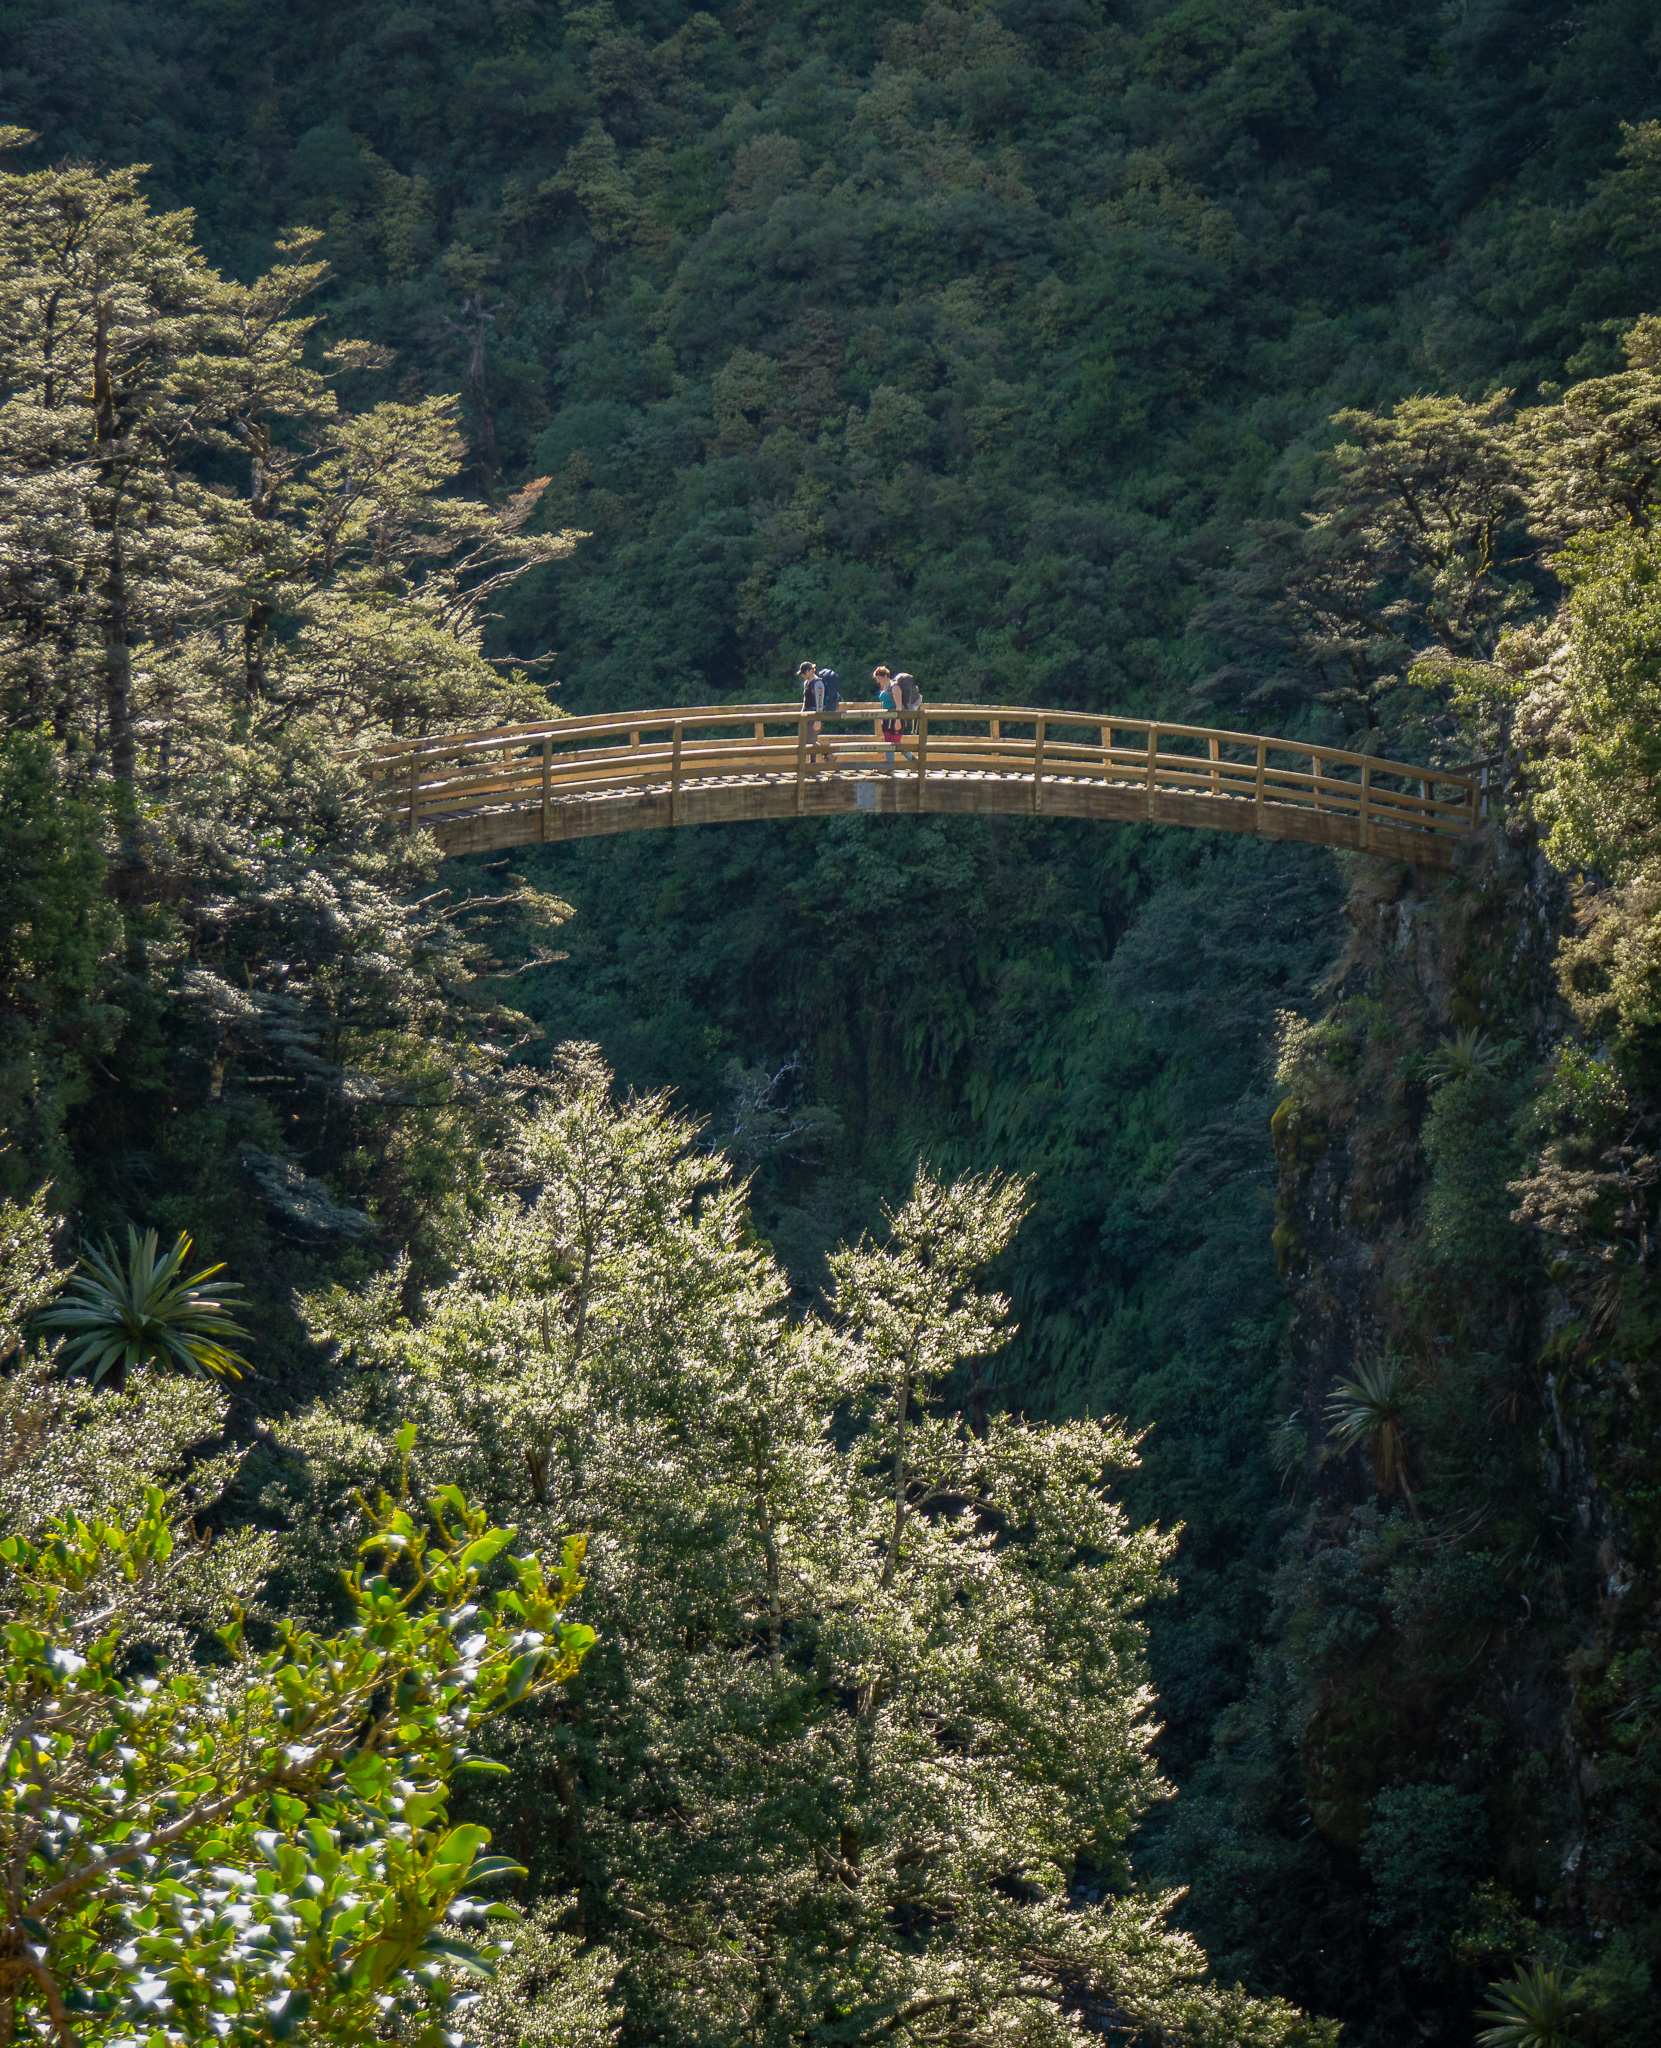 Two trampers crossing a curved bridge above a forested gorge, coming down from Rangiwahia Hut